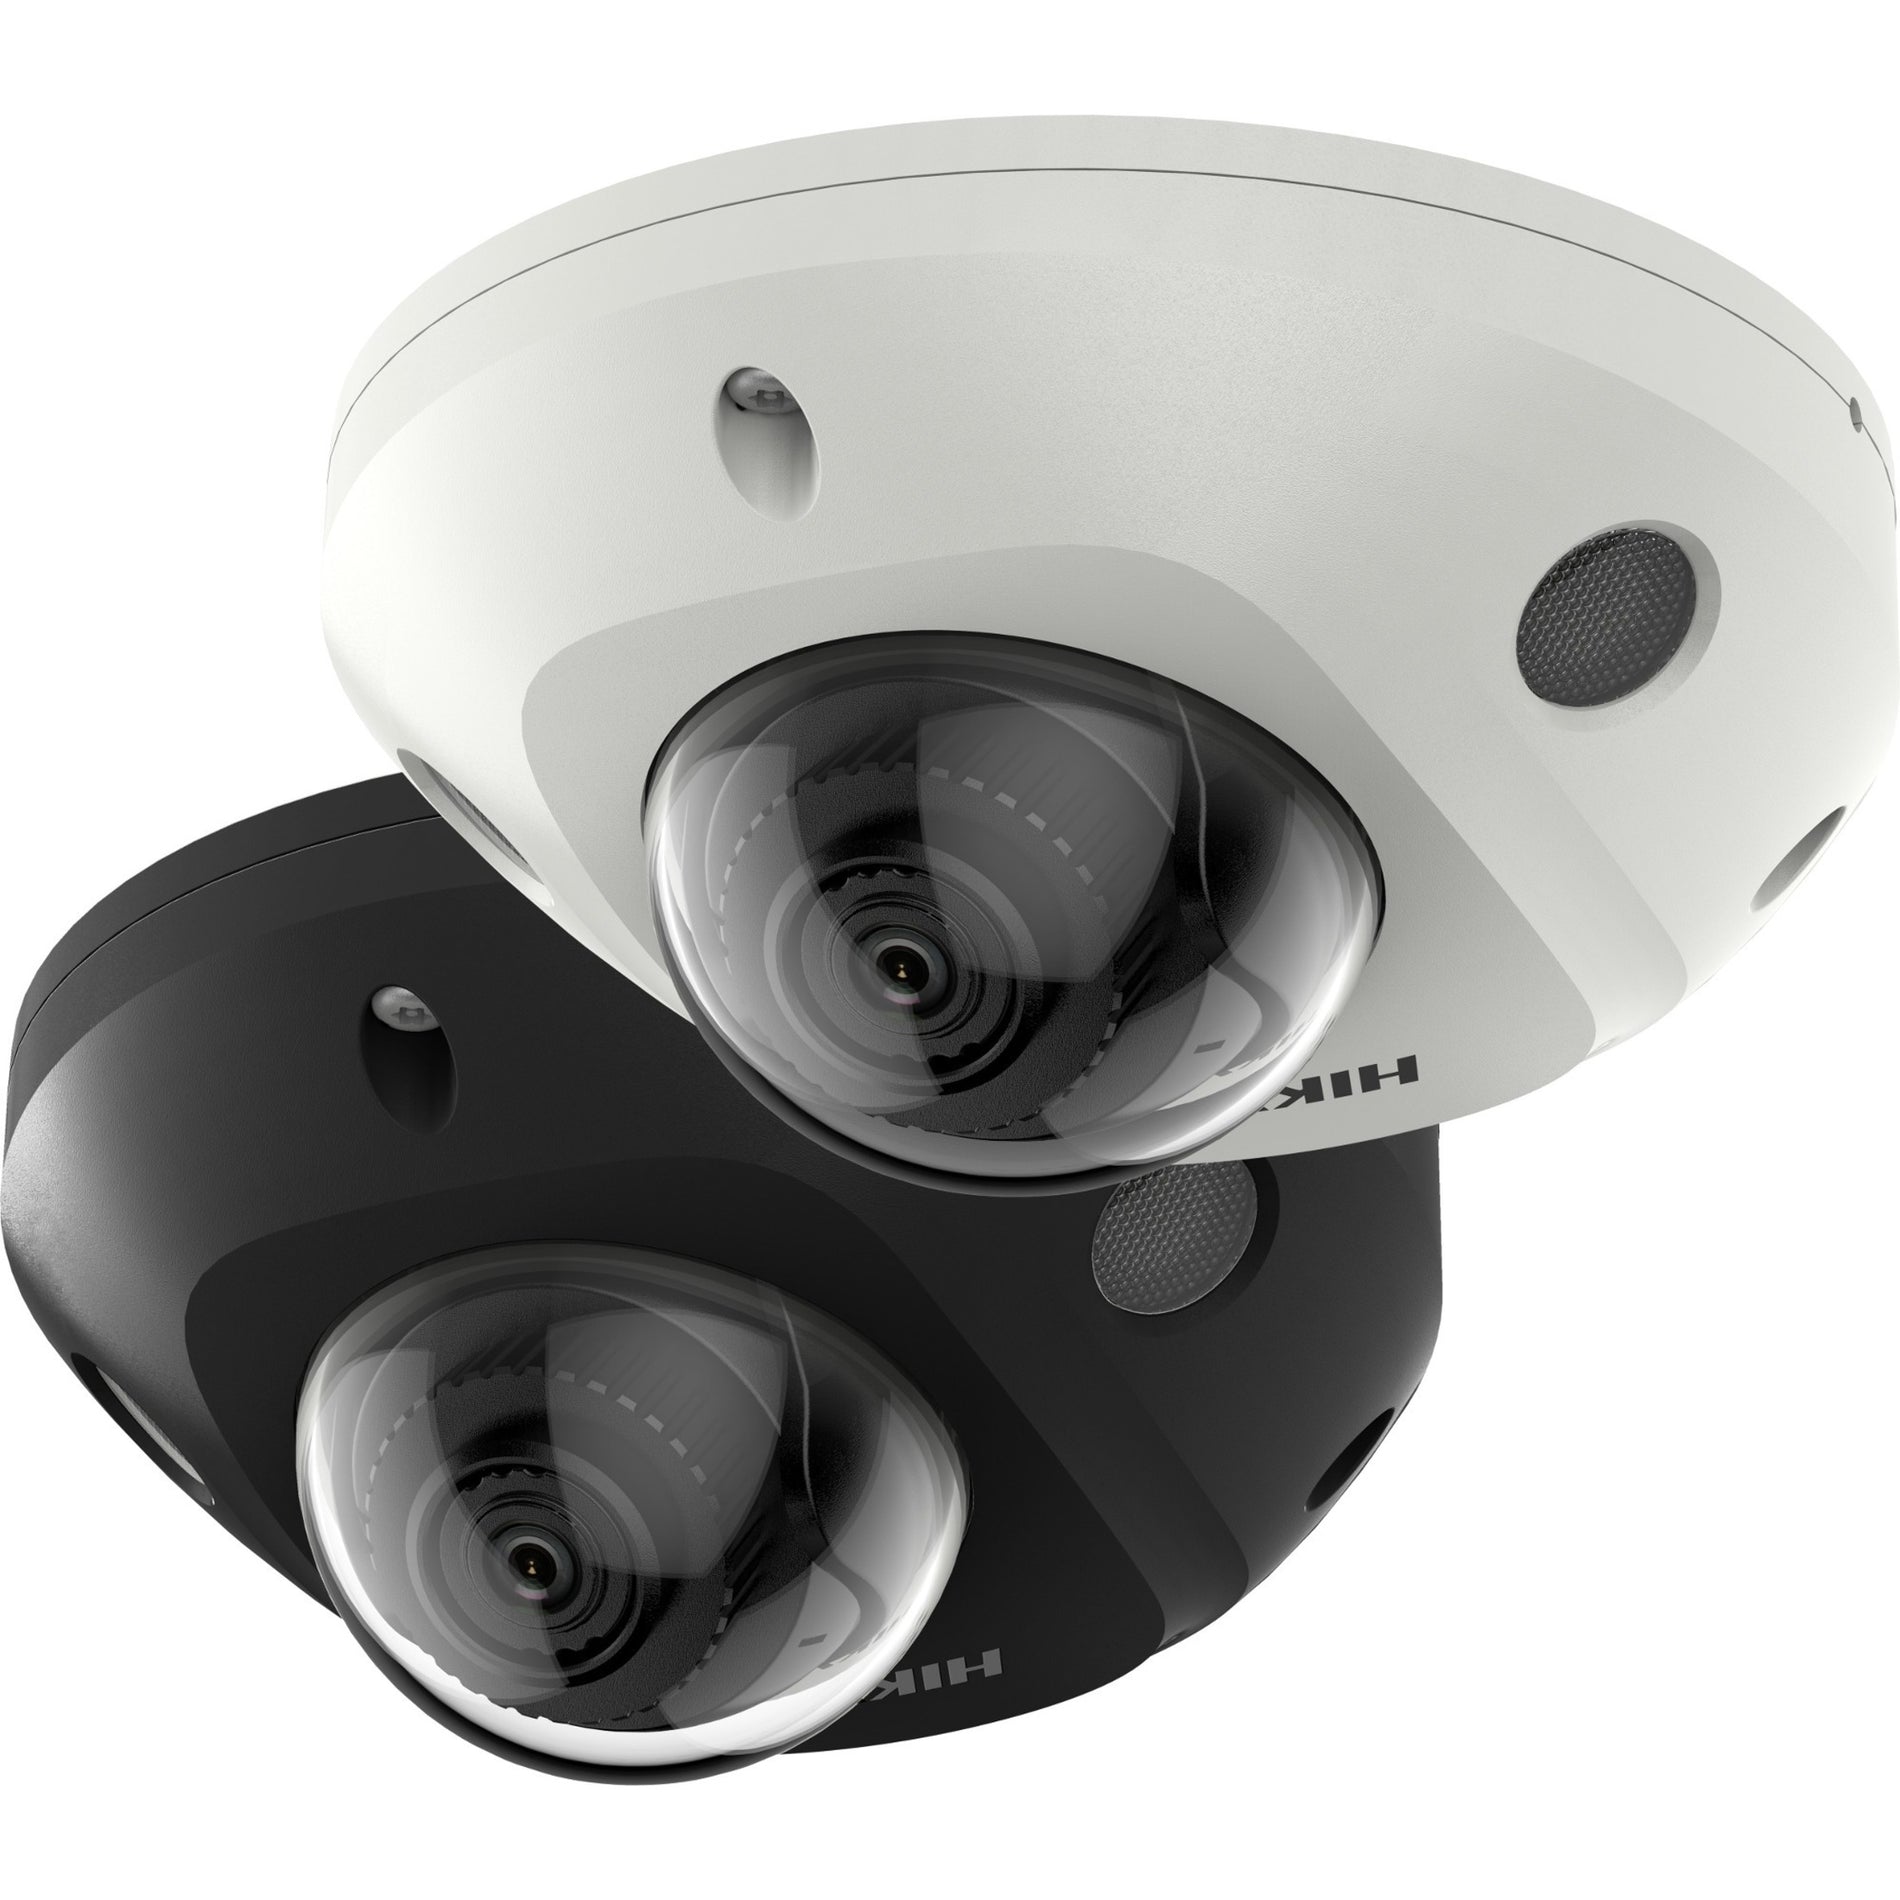 Hikvision DS-2CD2543G2-IWS 2.8MM 4 MP AcuSense Built-in Mic Fixed Mini Dome Network Camera, 2.8mm Lens, IR Night Vision, WiFi